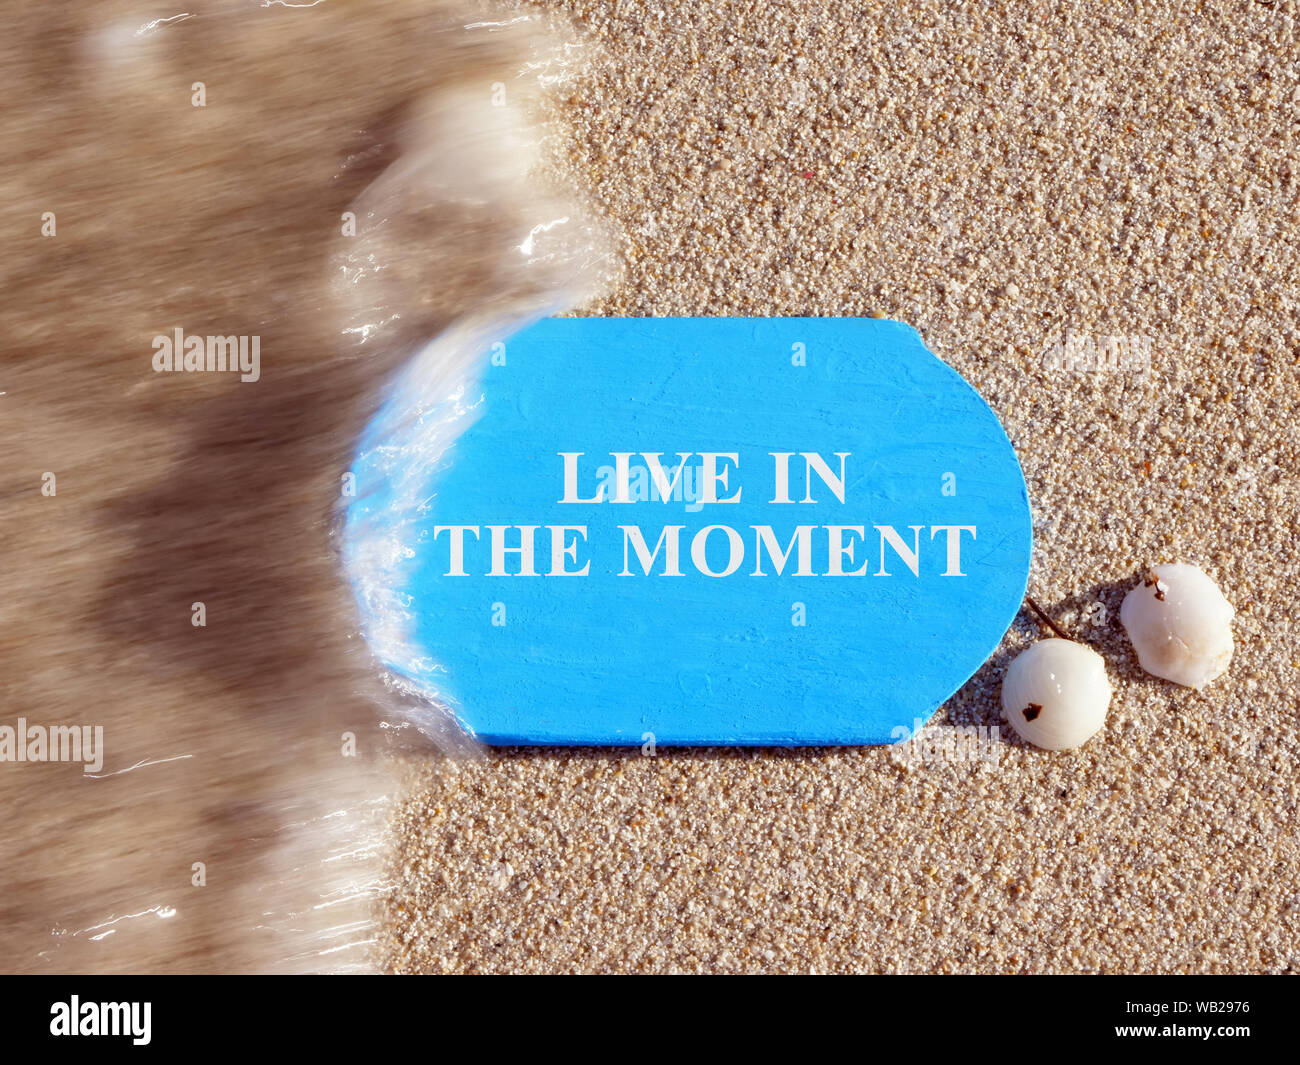 Live in the Moment sign on a blue plate. Stock Photo